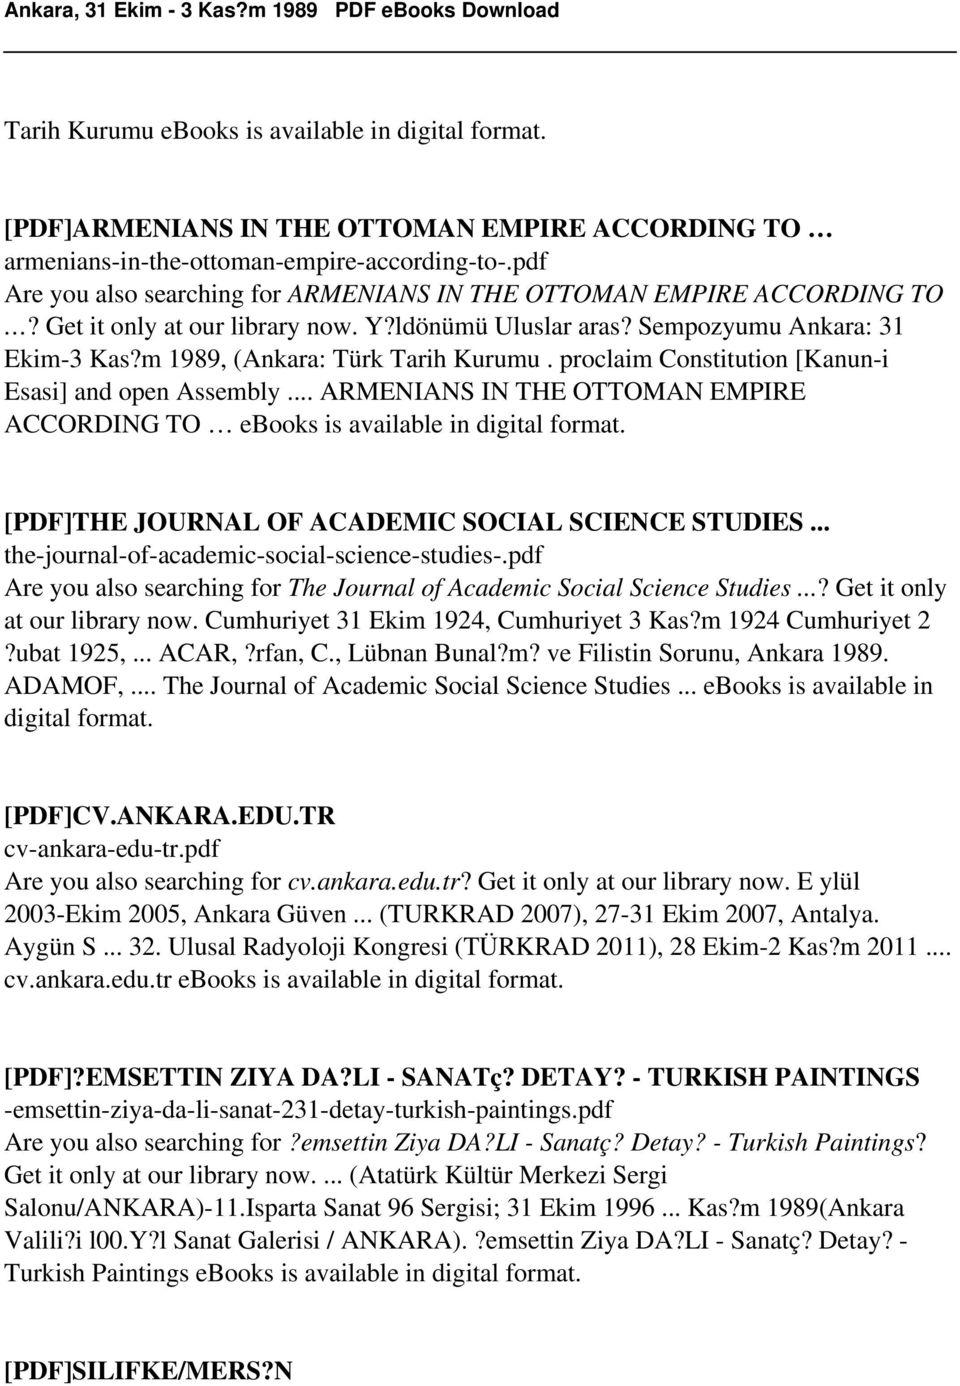 .. ARMENIANS IN THE OTTOMAN EMPIRE ACCORDING TO ebooks is [PDF]THE JOURNAL OF ACADEMIC SOCIAL SCIENCE STUDIES... the-journal-of-academic-social-science-studies-.